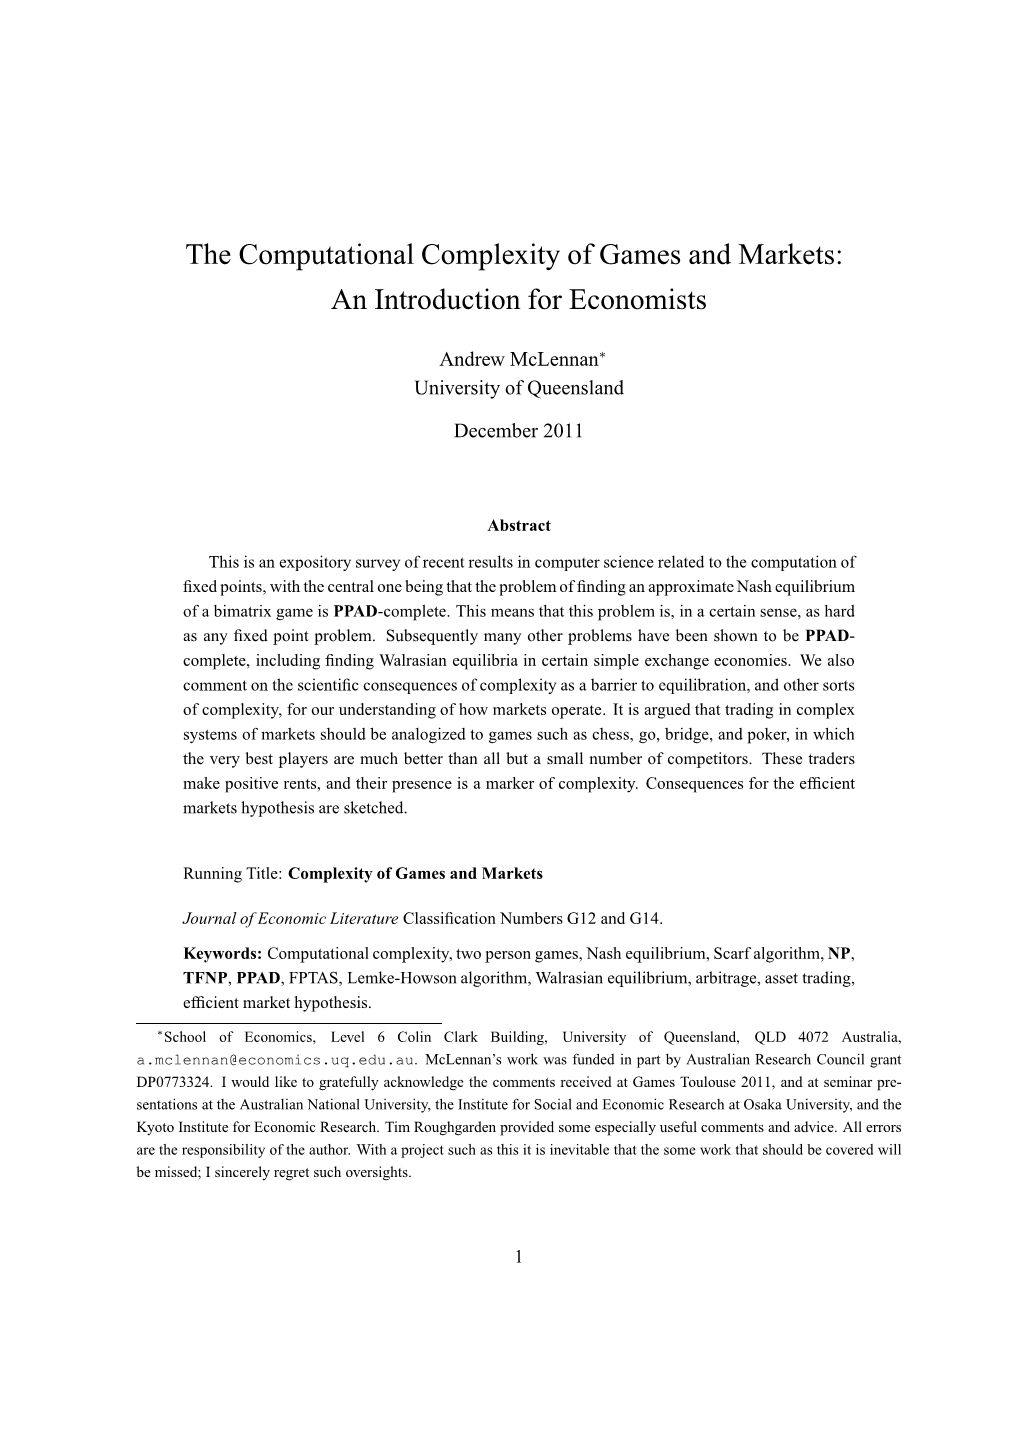 The Computational Complexity of Games and Markets: an Introduction for Economists